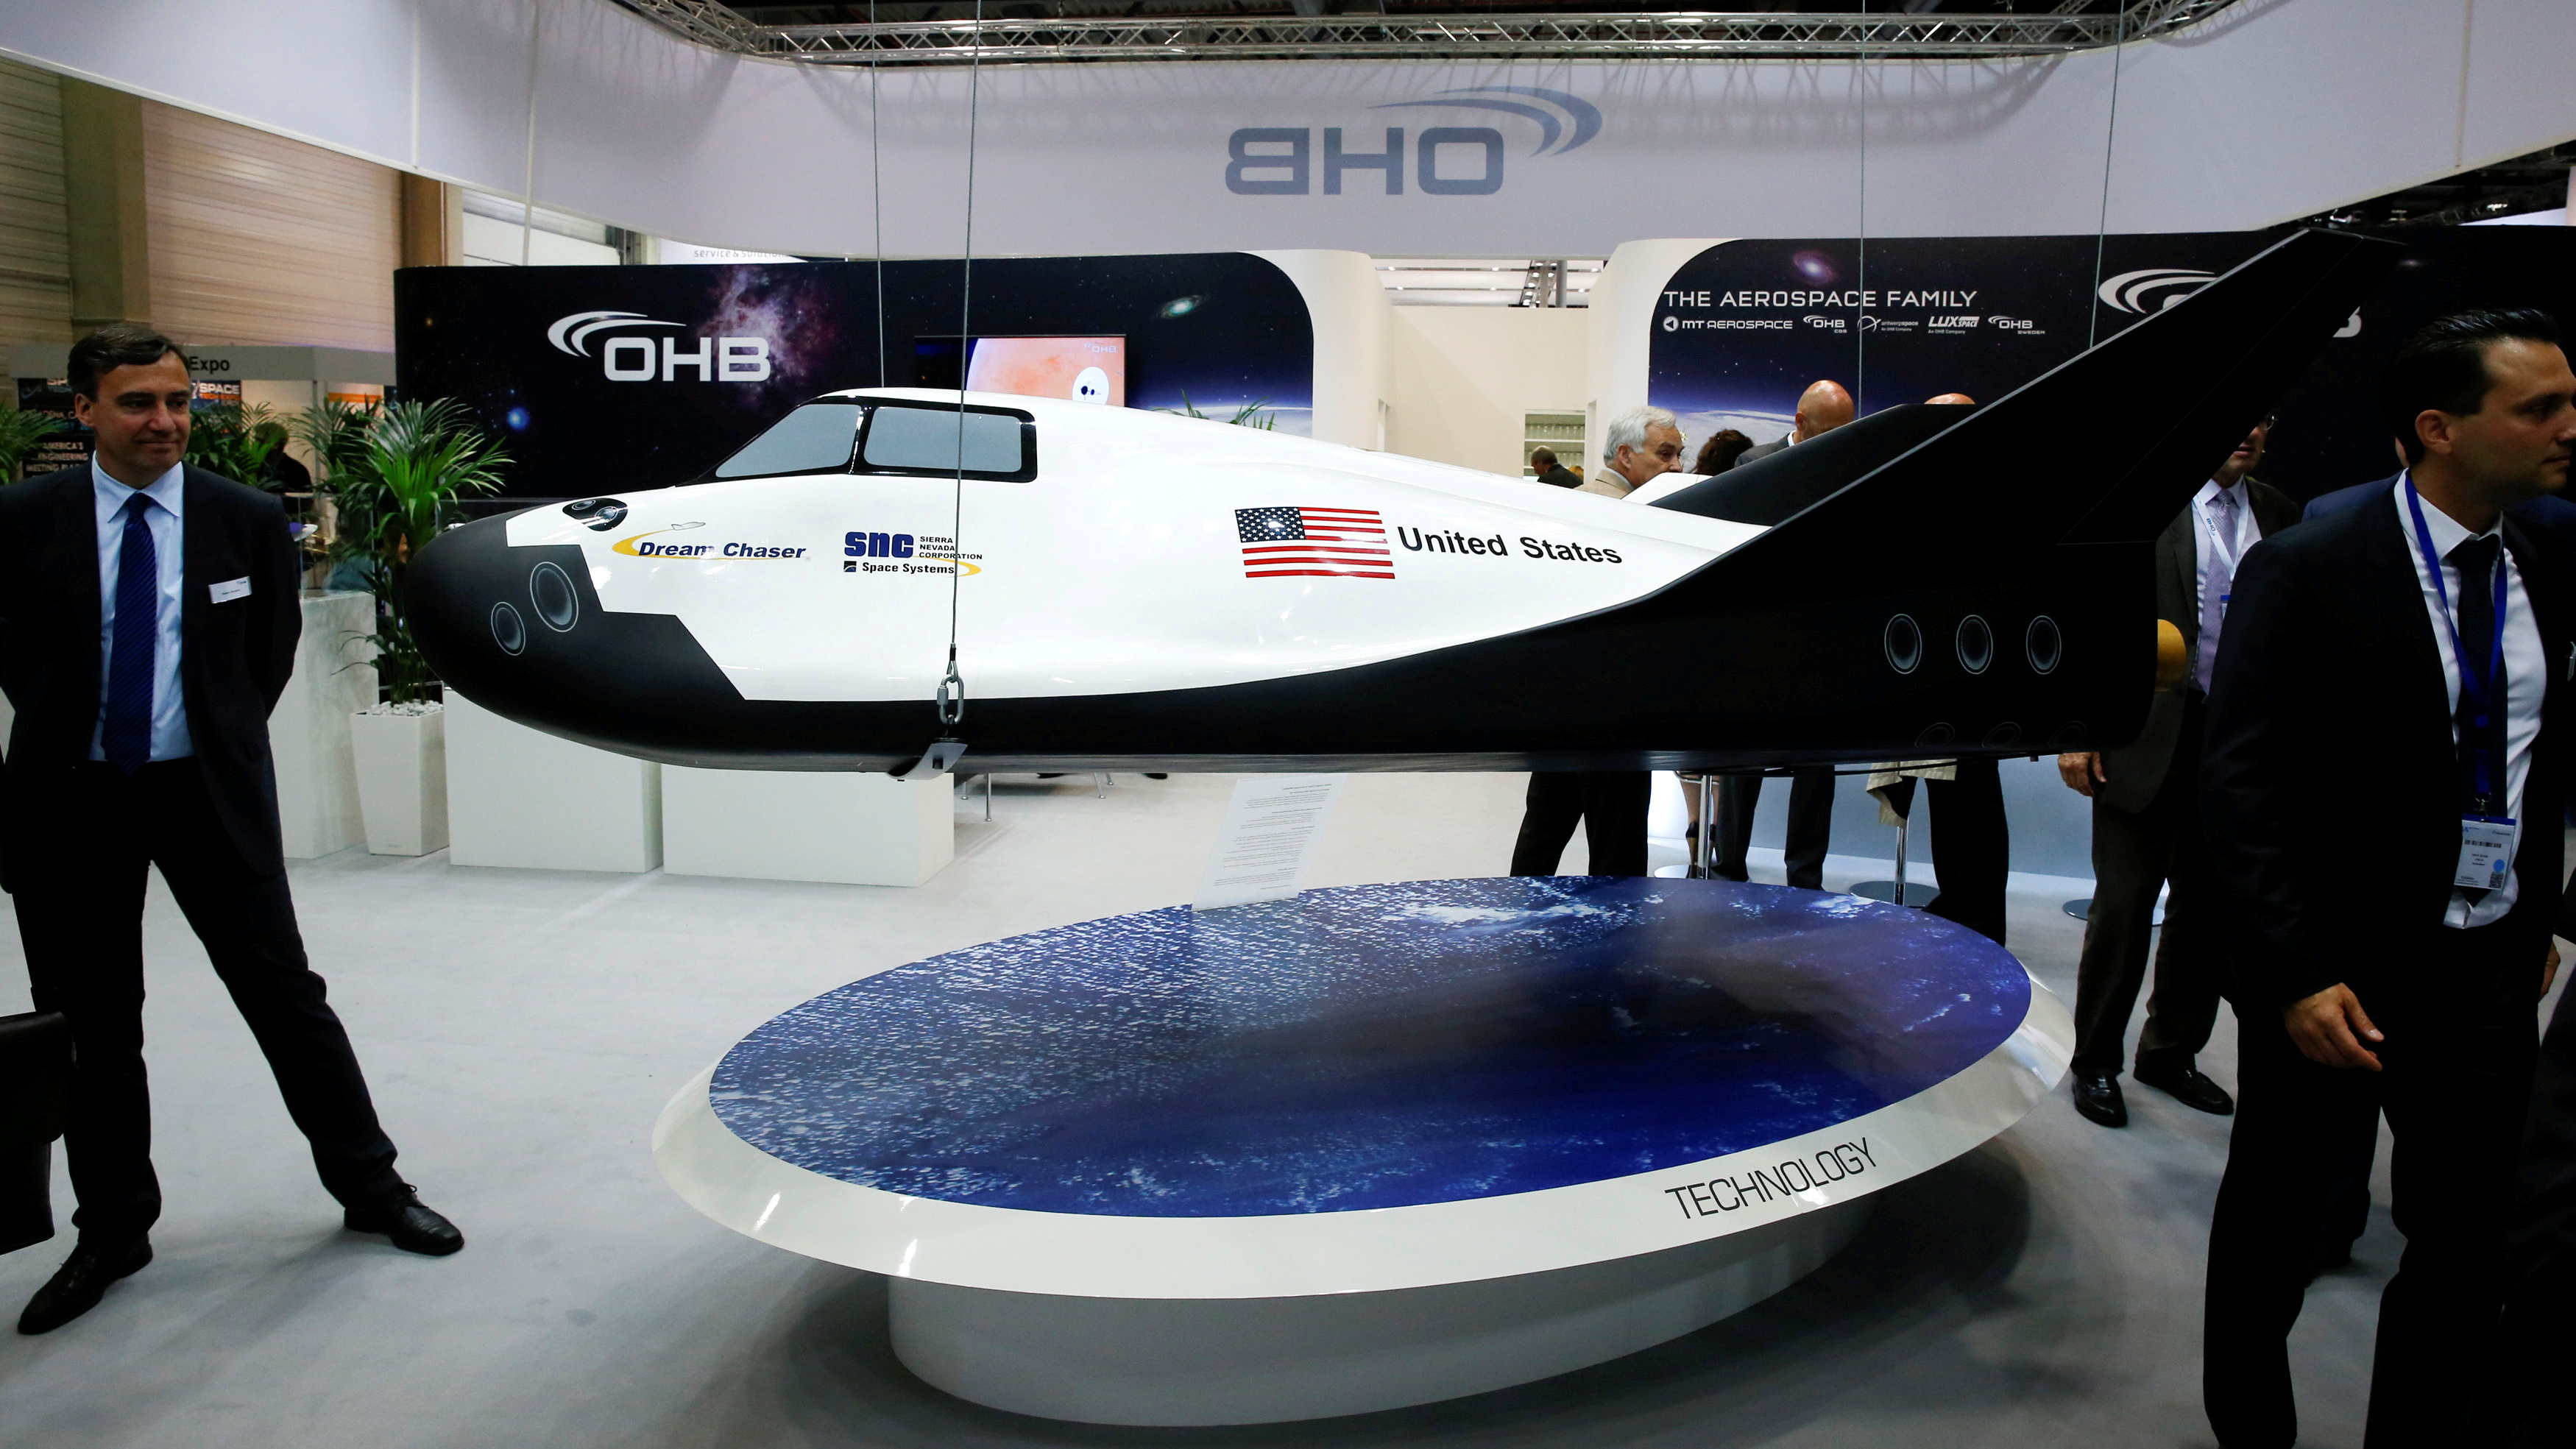 Visitors look at the Dream Chaser Cargo System developed by Sierra Nevada Corporation (SNC) Space Systems at the ILA Berlin Air Show in Schoenefeld, south of Berlin, Germany, June 1, 2016.    REUTERS/Fabrizio Bensch